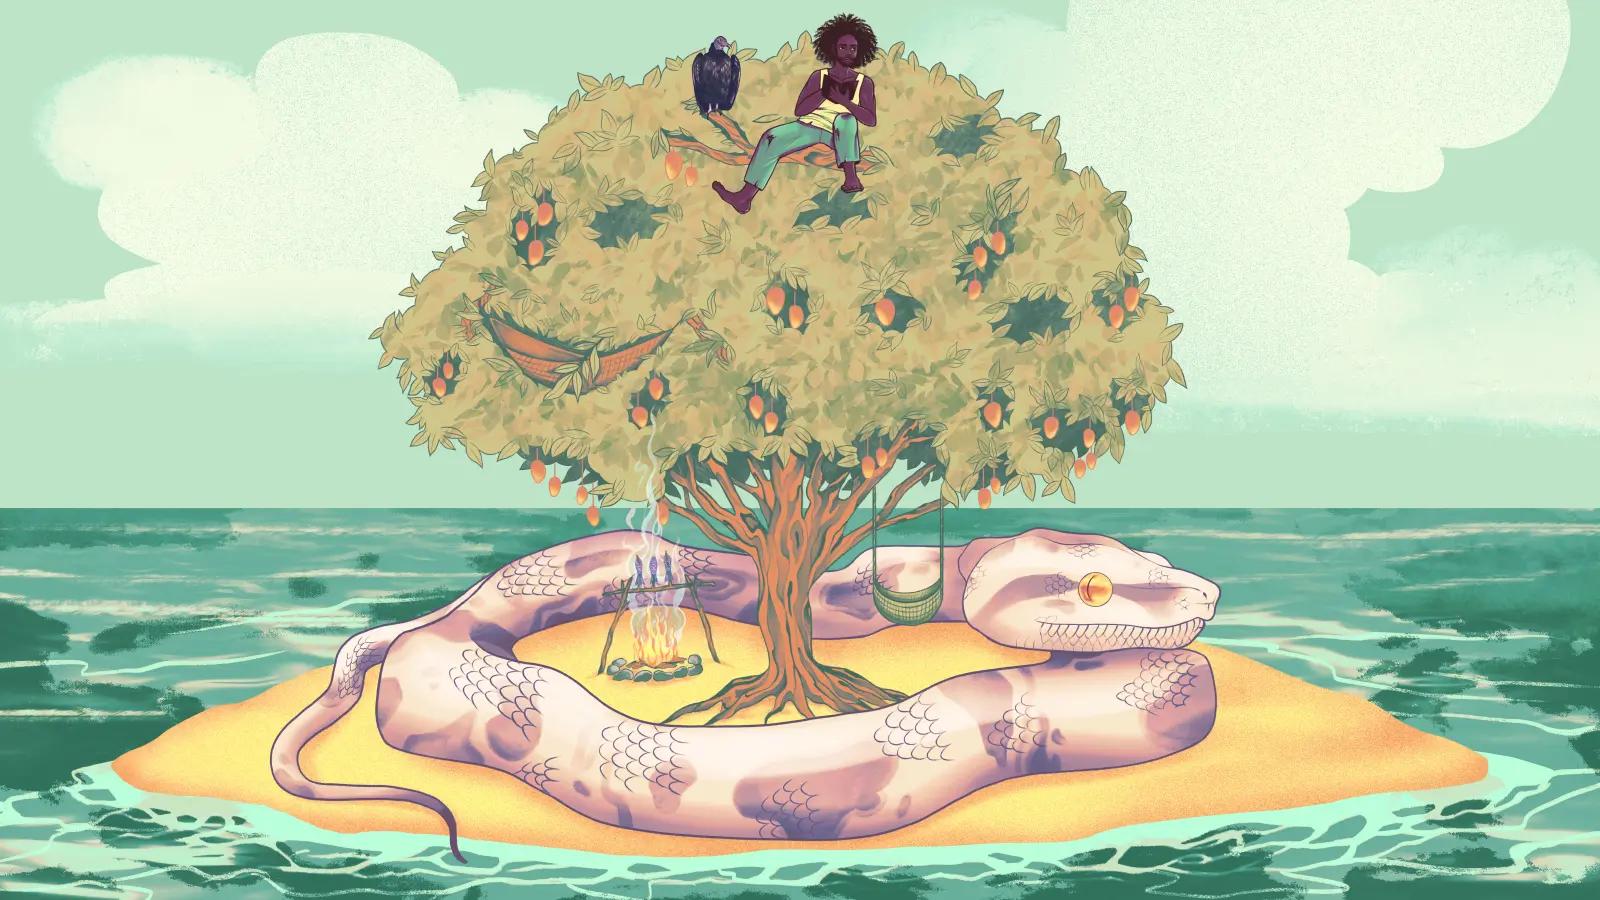 Illustration: A Black man in tattered clothes sits atop a tree in the middle of a small island. A black bird sits next to him and an unrealistically large purple snake with yellow eyes encircles the tree.